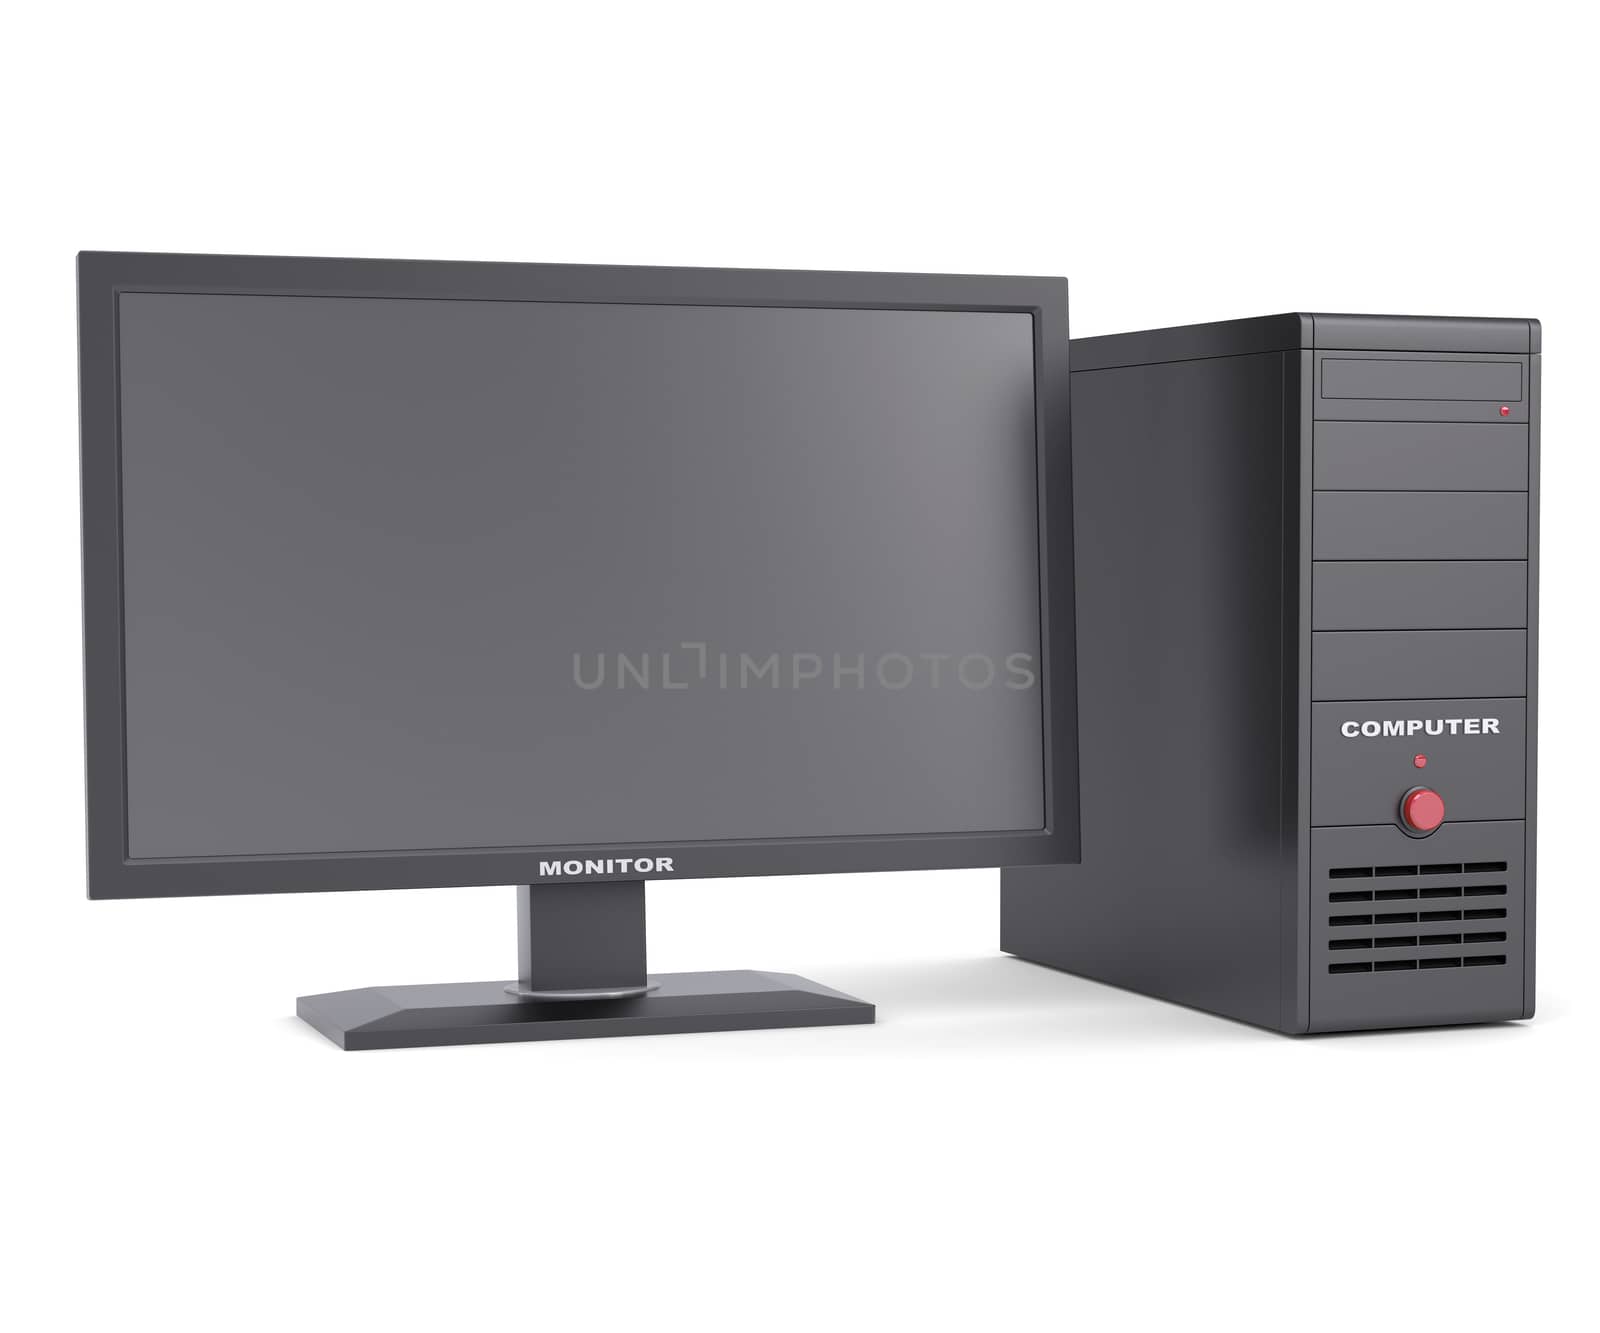 System unit with a monitor. Isolated render on a white background